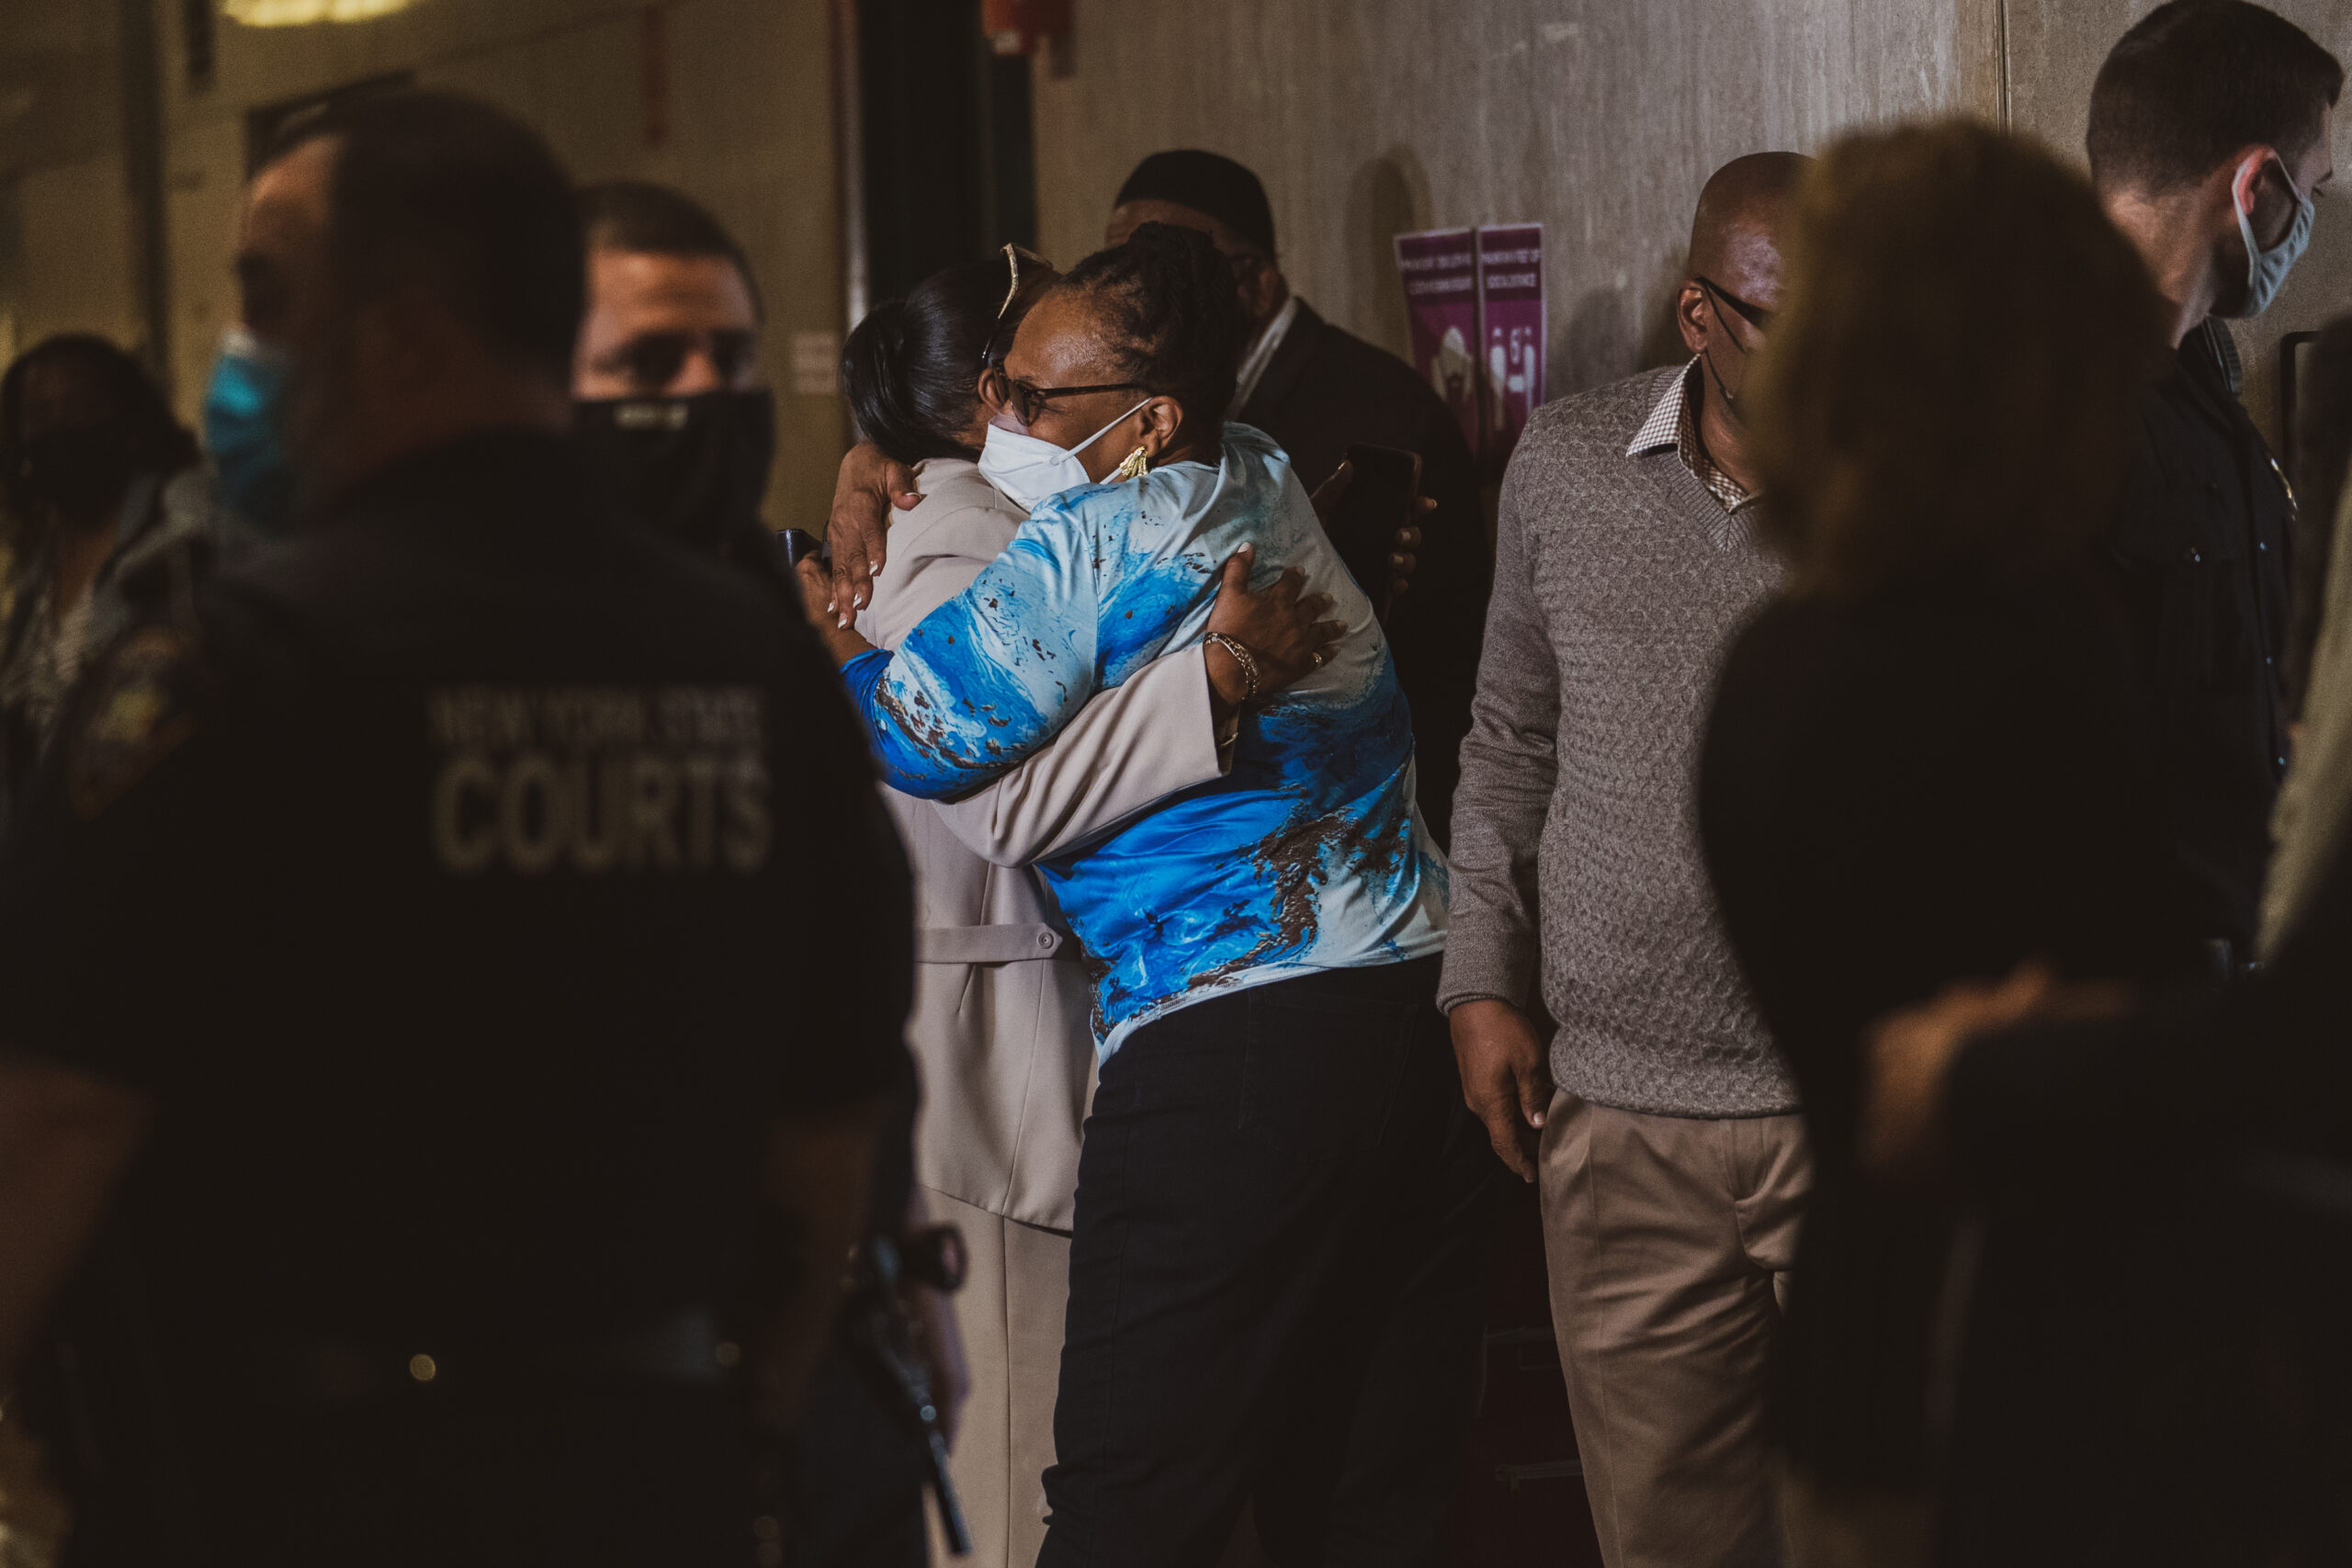 Muhamad Aziz's family members hug at the court before his exoneration hearing.(Image: Jeenah Moon for the Innocence Project)